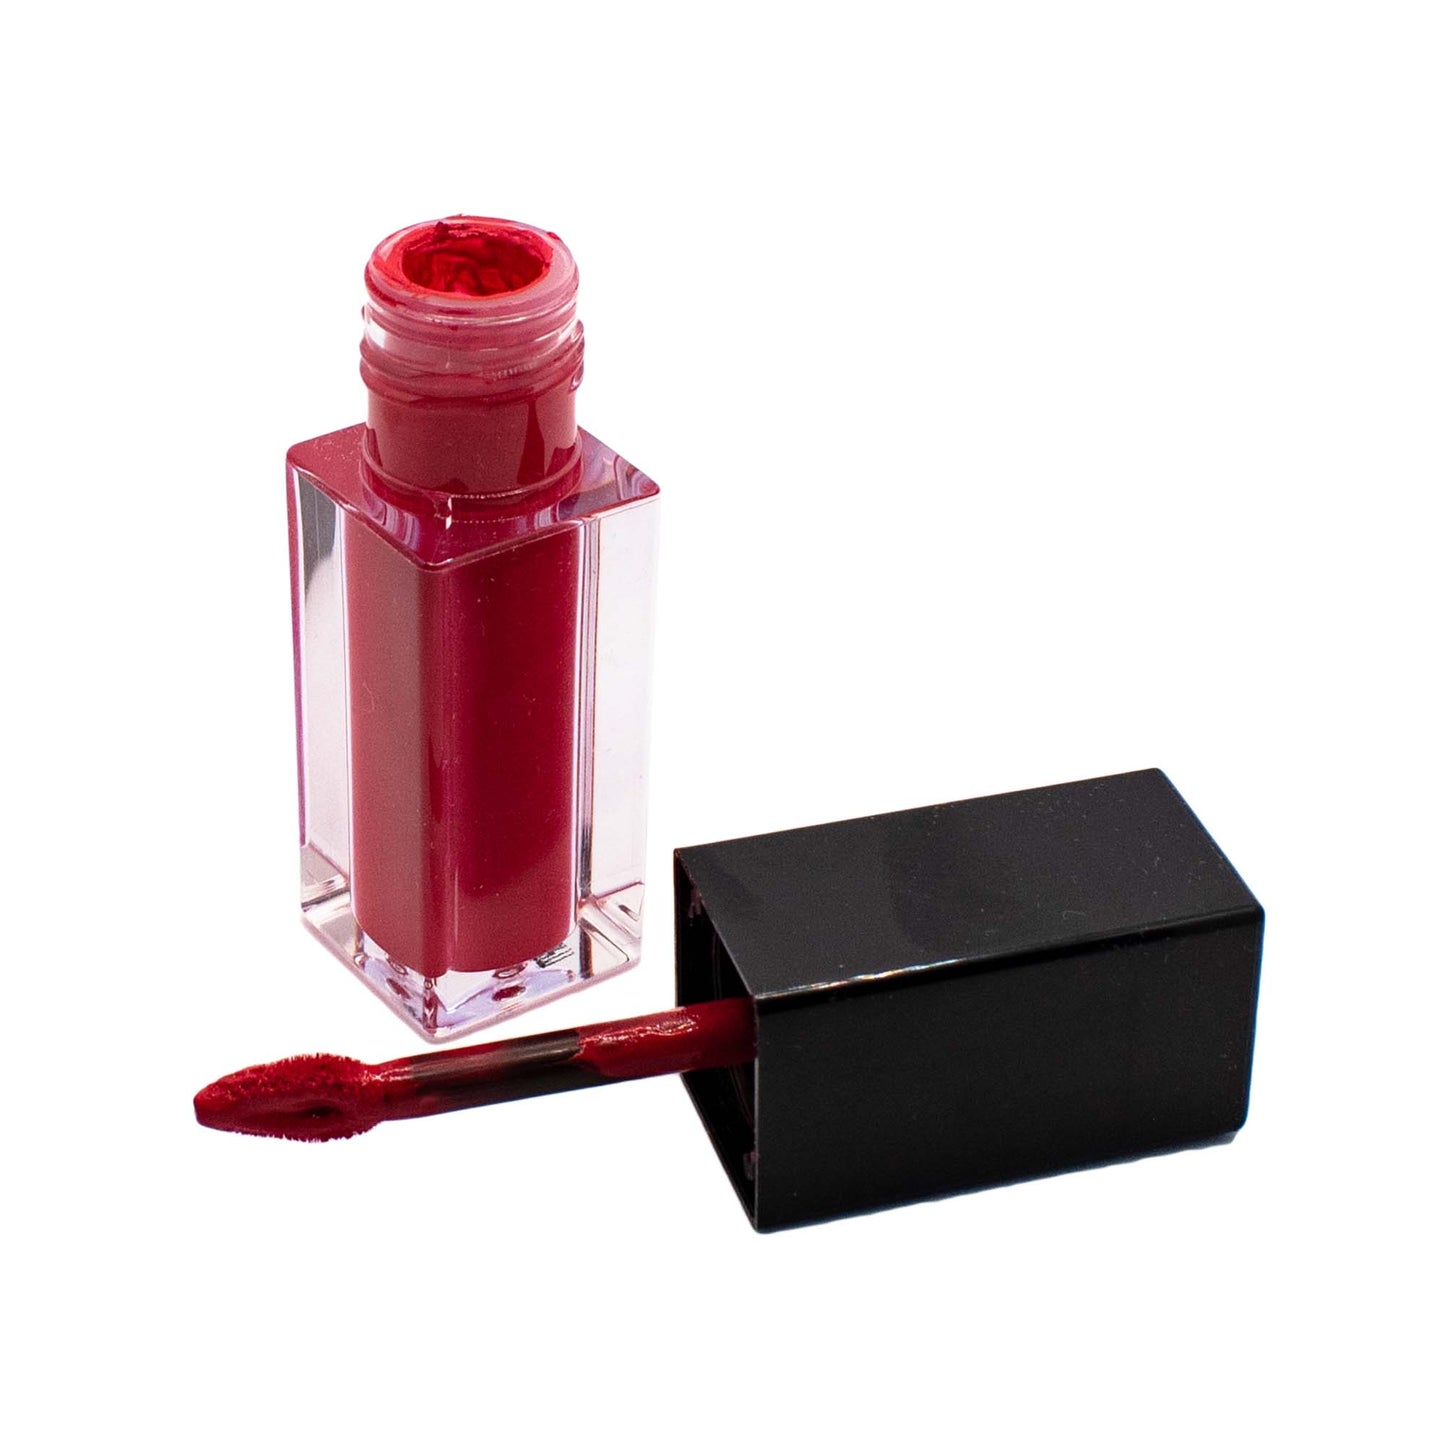 Twilight Matte Lip Stain in Cruisin Organics has a long-lasting, vitamin E-enriched formula for a timeless, matte look.